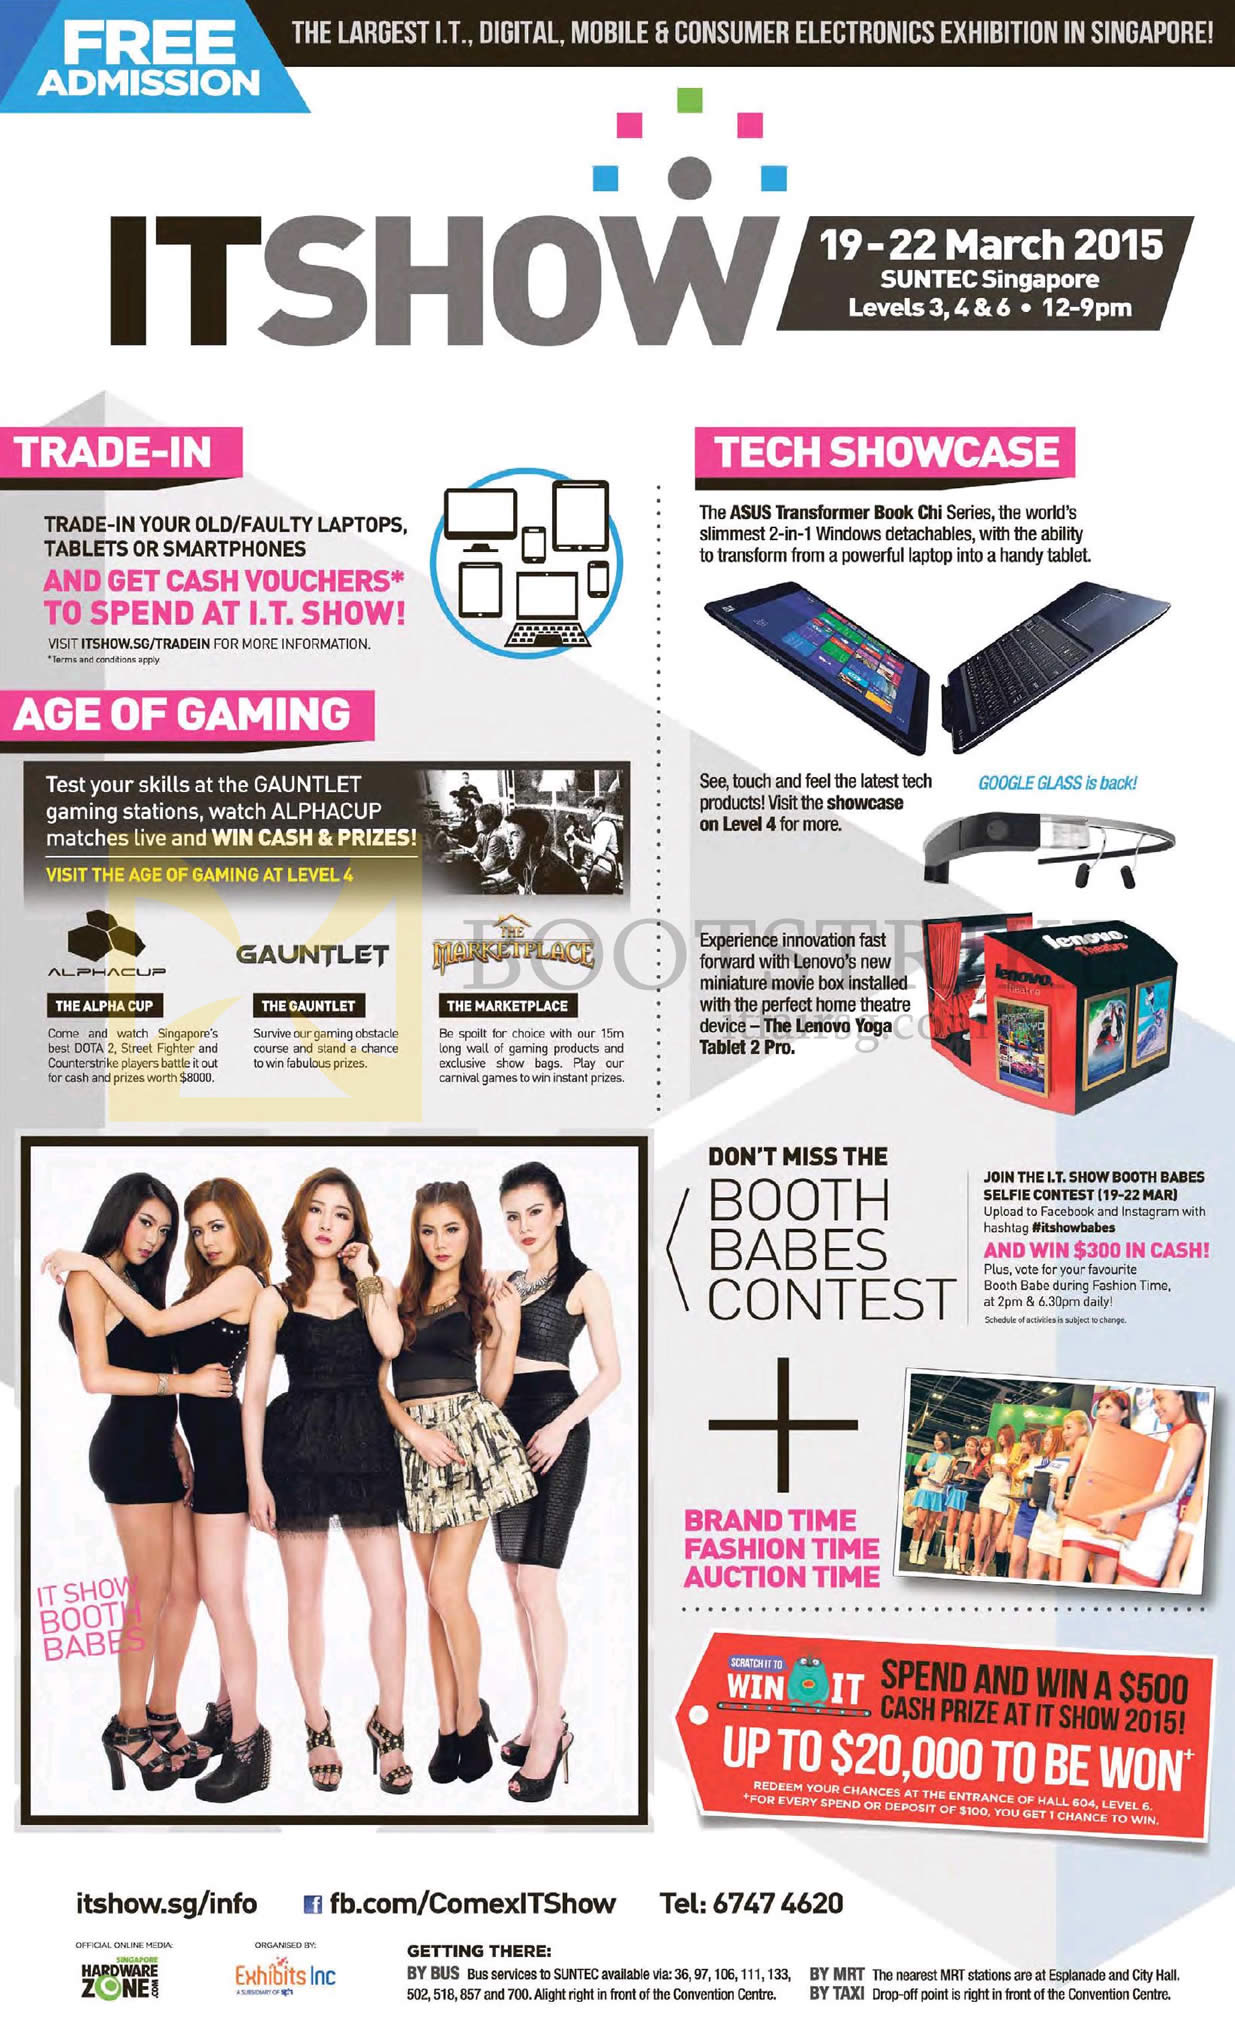 IT SHOW 2015 price list image brochure of Event Details, Location, Opening Hours, Lucky Draw, Trade-In, Tech Showcase, Age Of Gaming